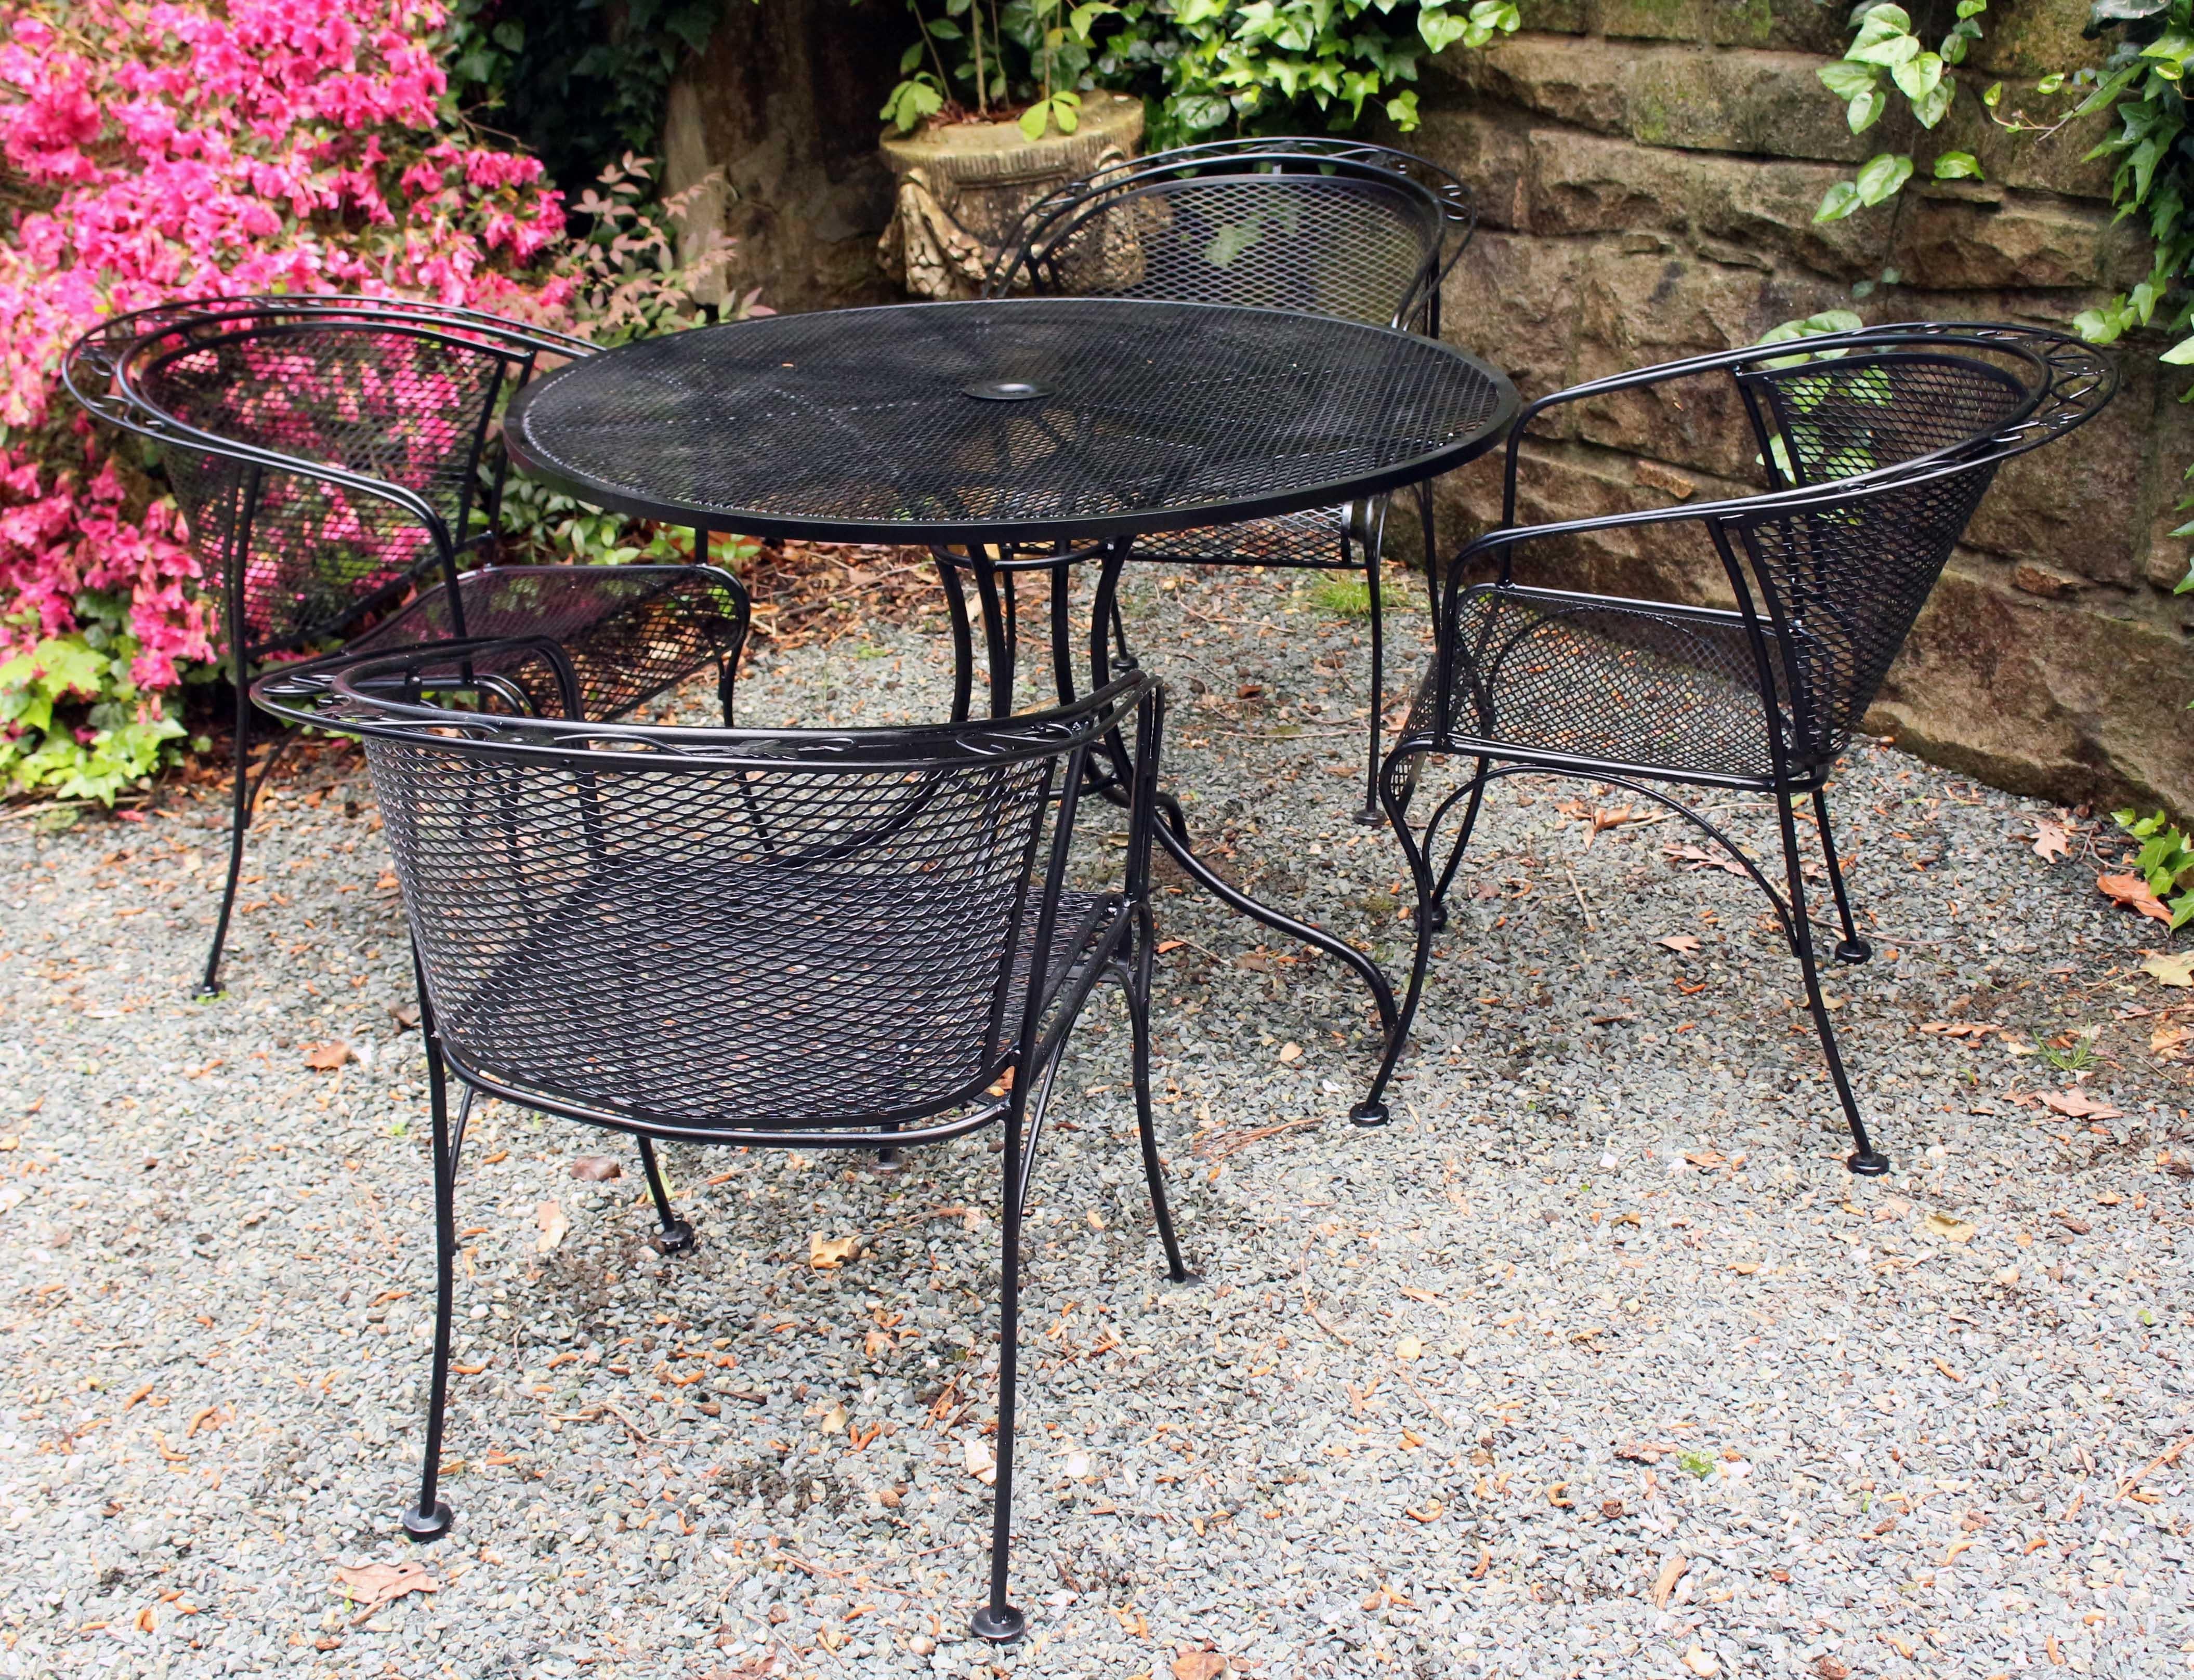 Vintage Woodard wrought iron round table & 4 barrel back arm chairs. Best quality stretchered table. Chairs with central flower to trailing vine & leaf motif. Original black paint brushed & repainted.

Table: 42 1/2